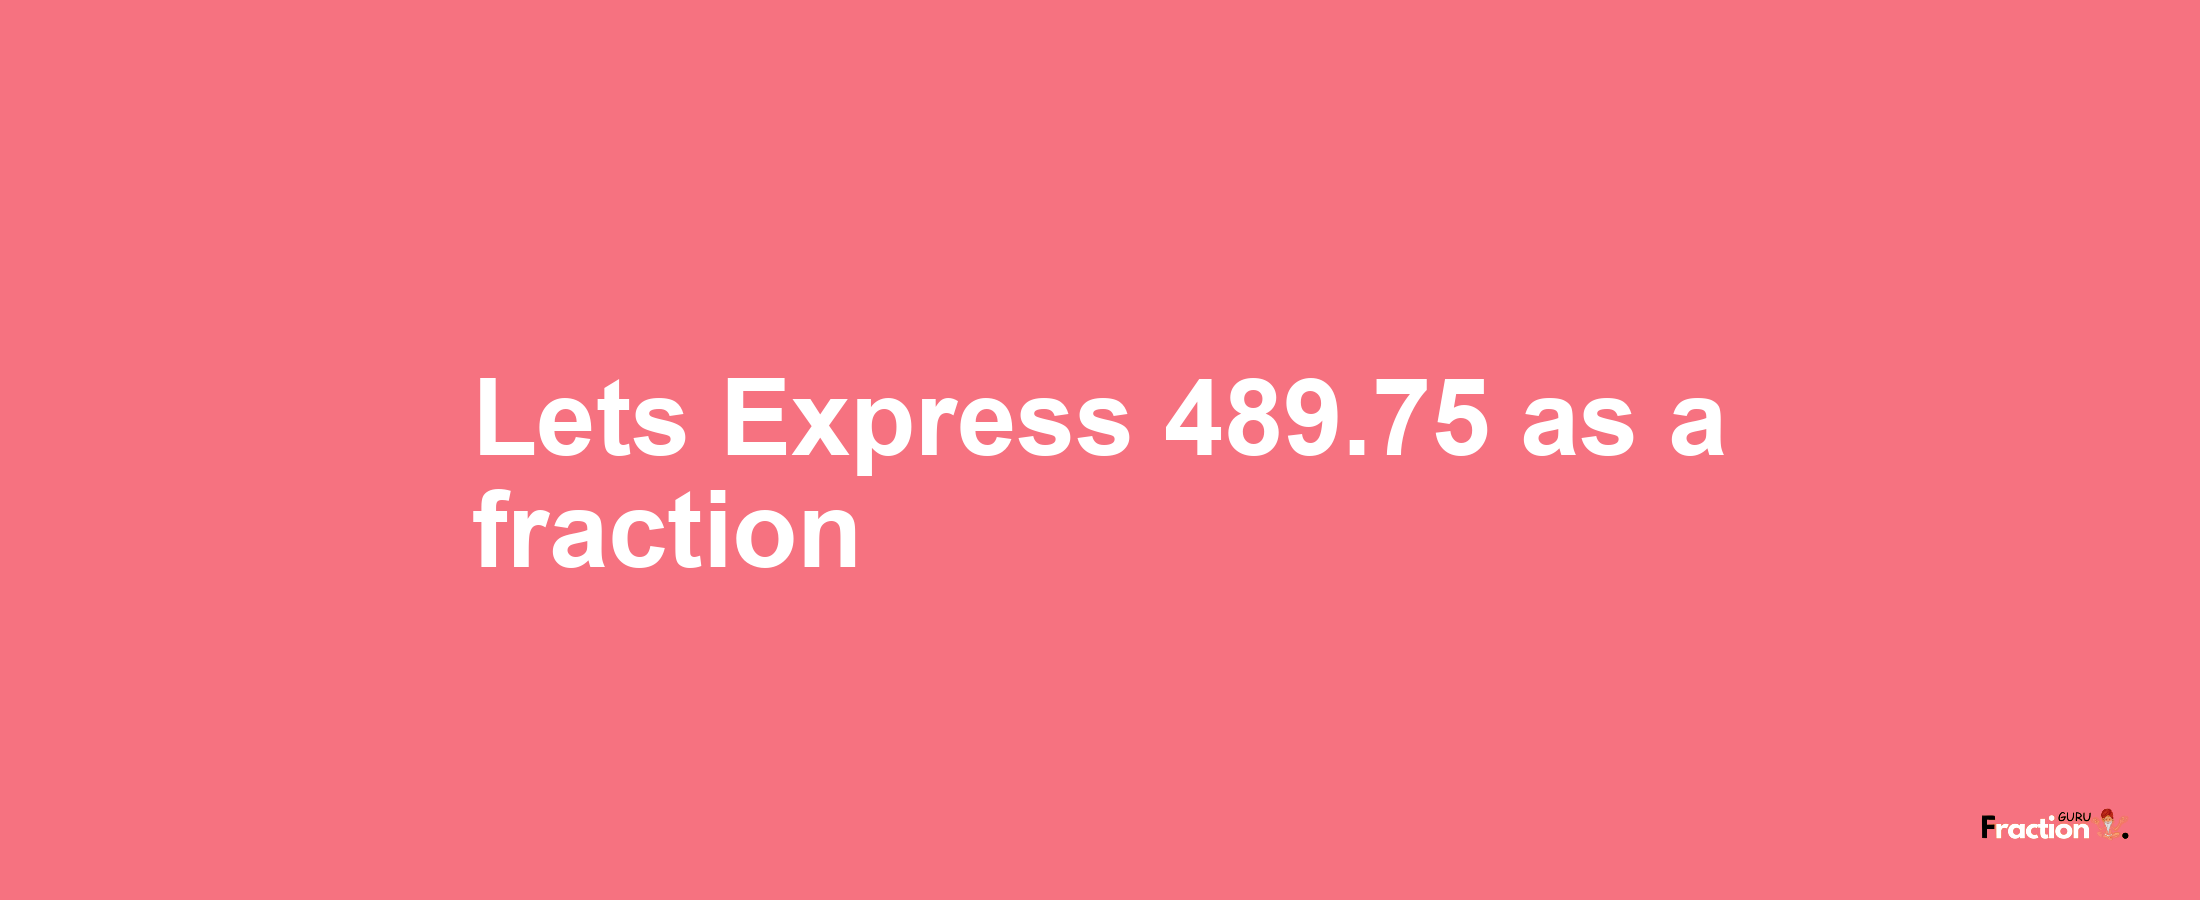 Lets Express 489.75 as afraction